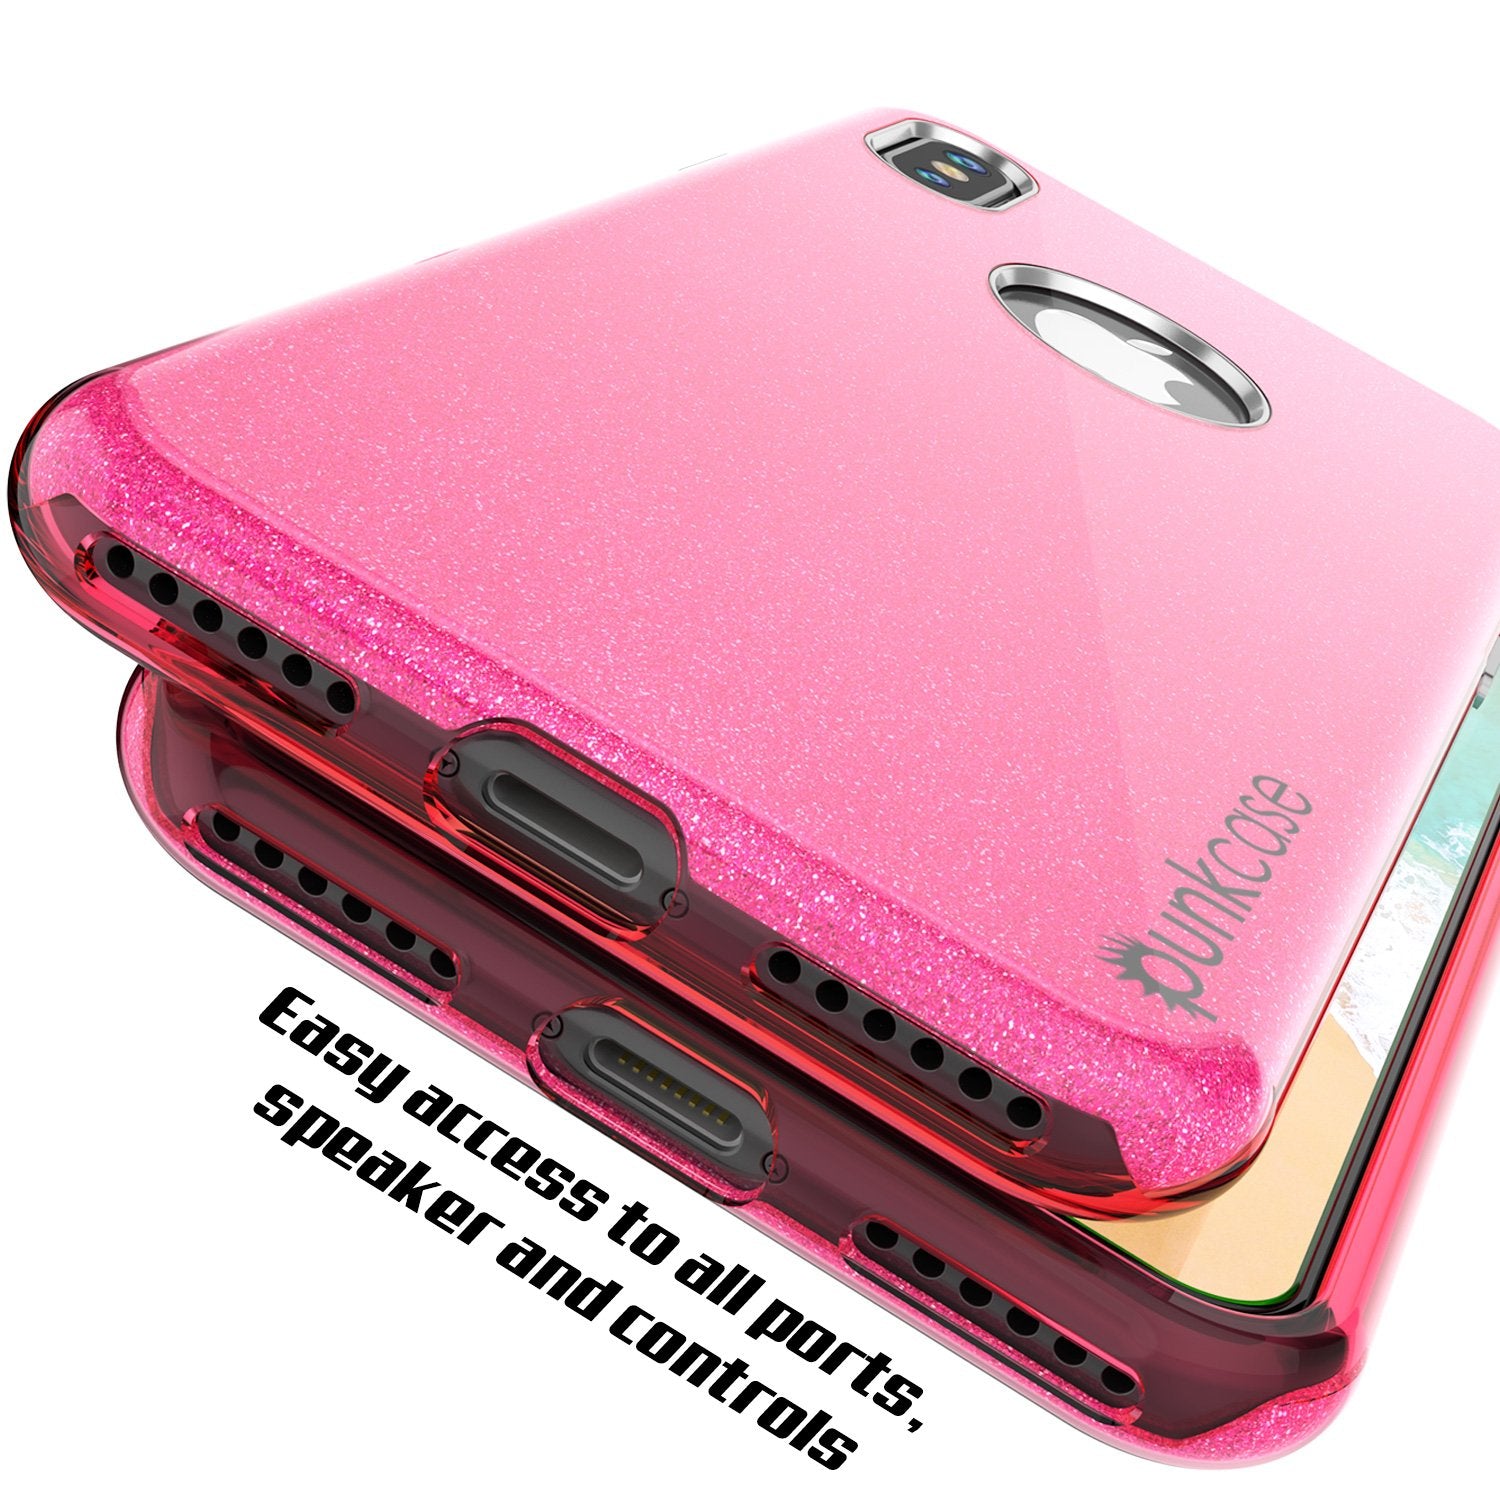 iPhone X Case, Punkcase Galactic 2.0 Series Ultra Slim Cover [Pink]